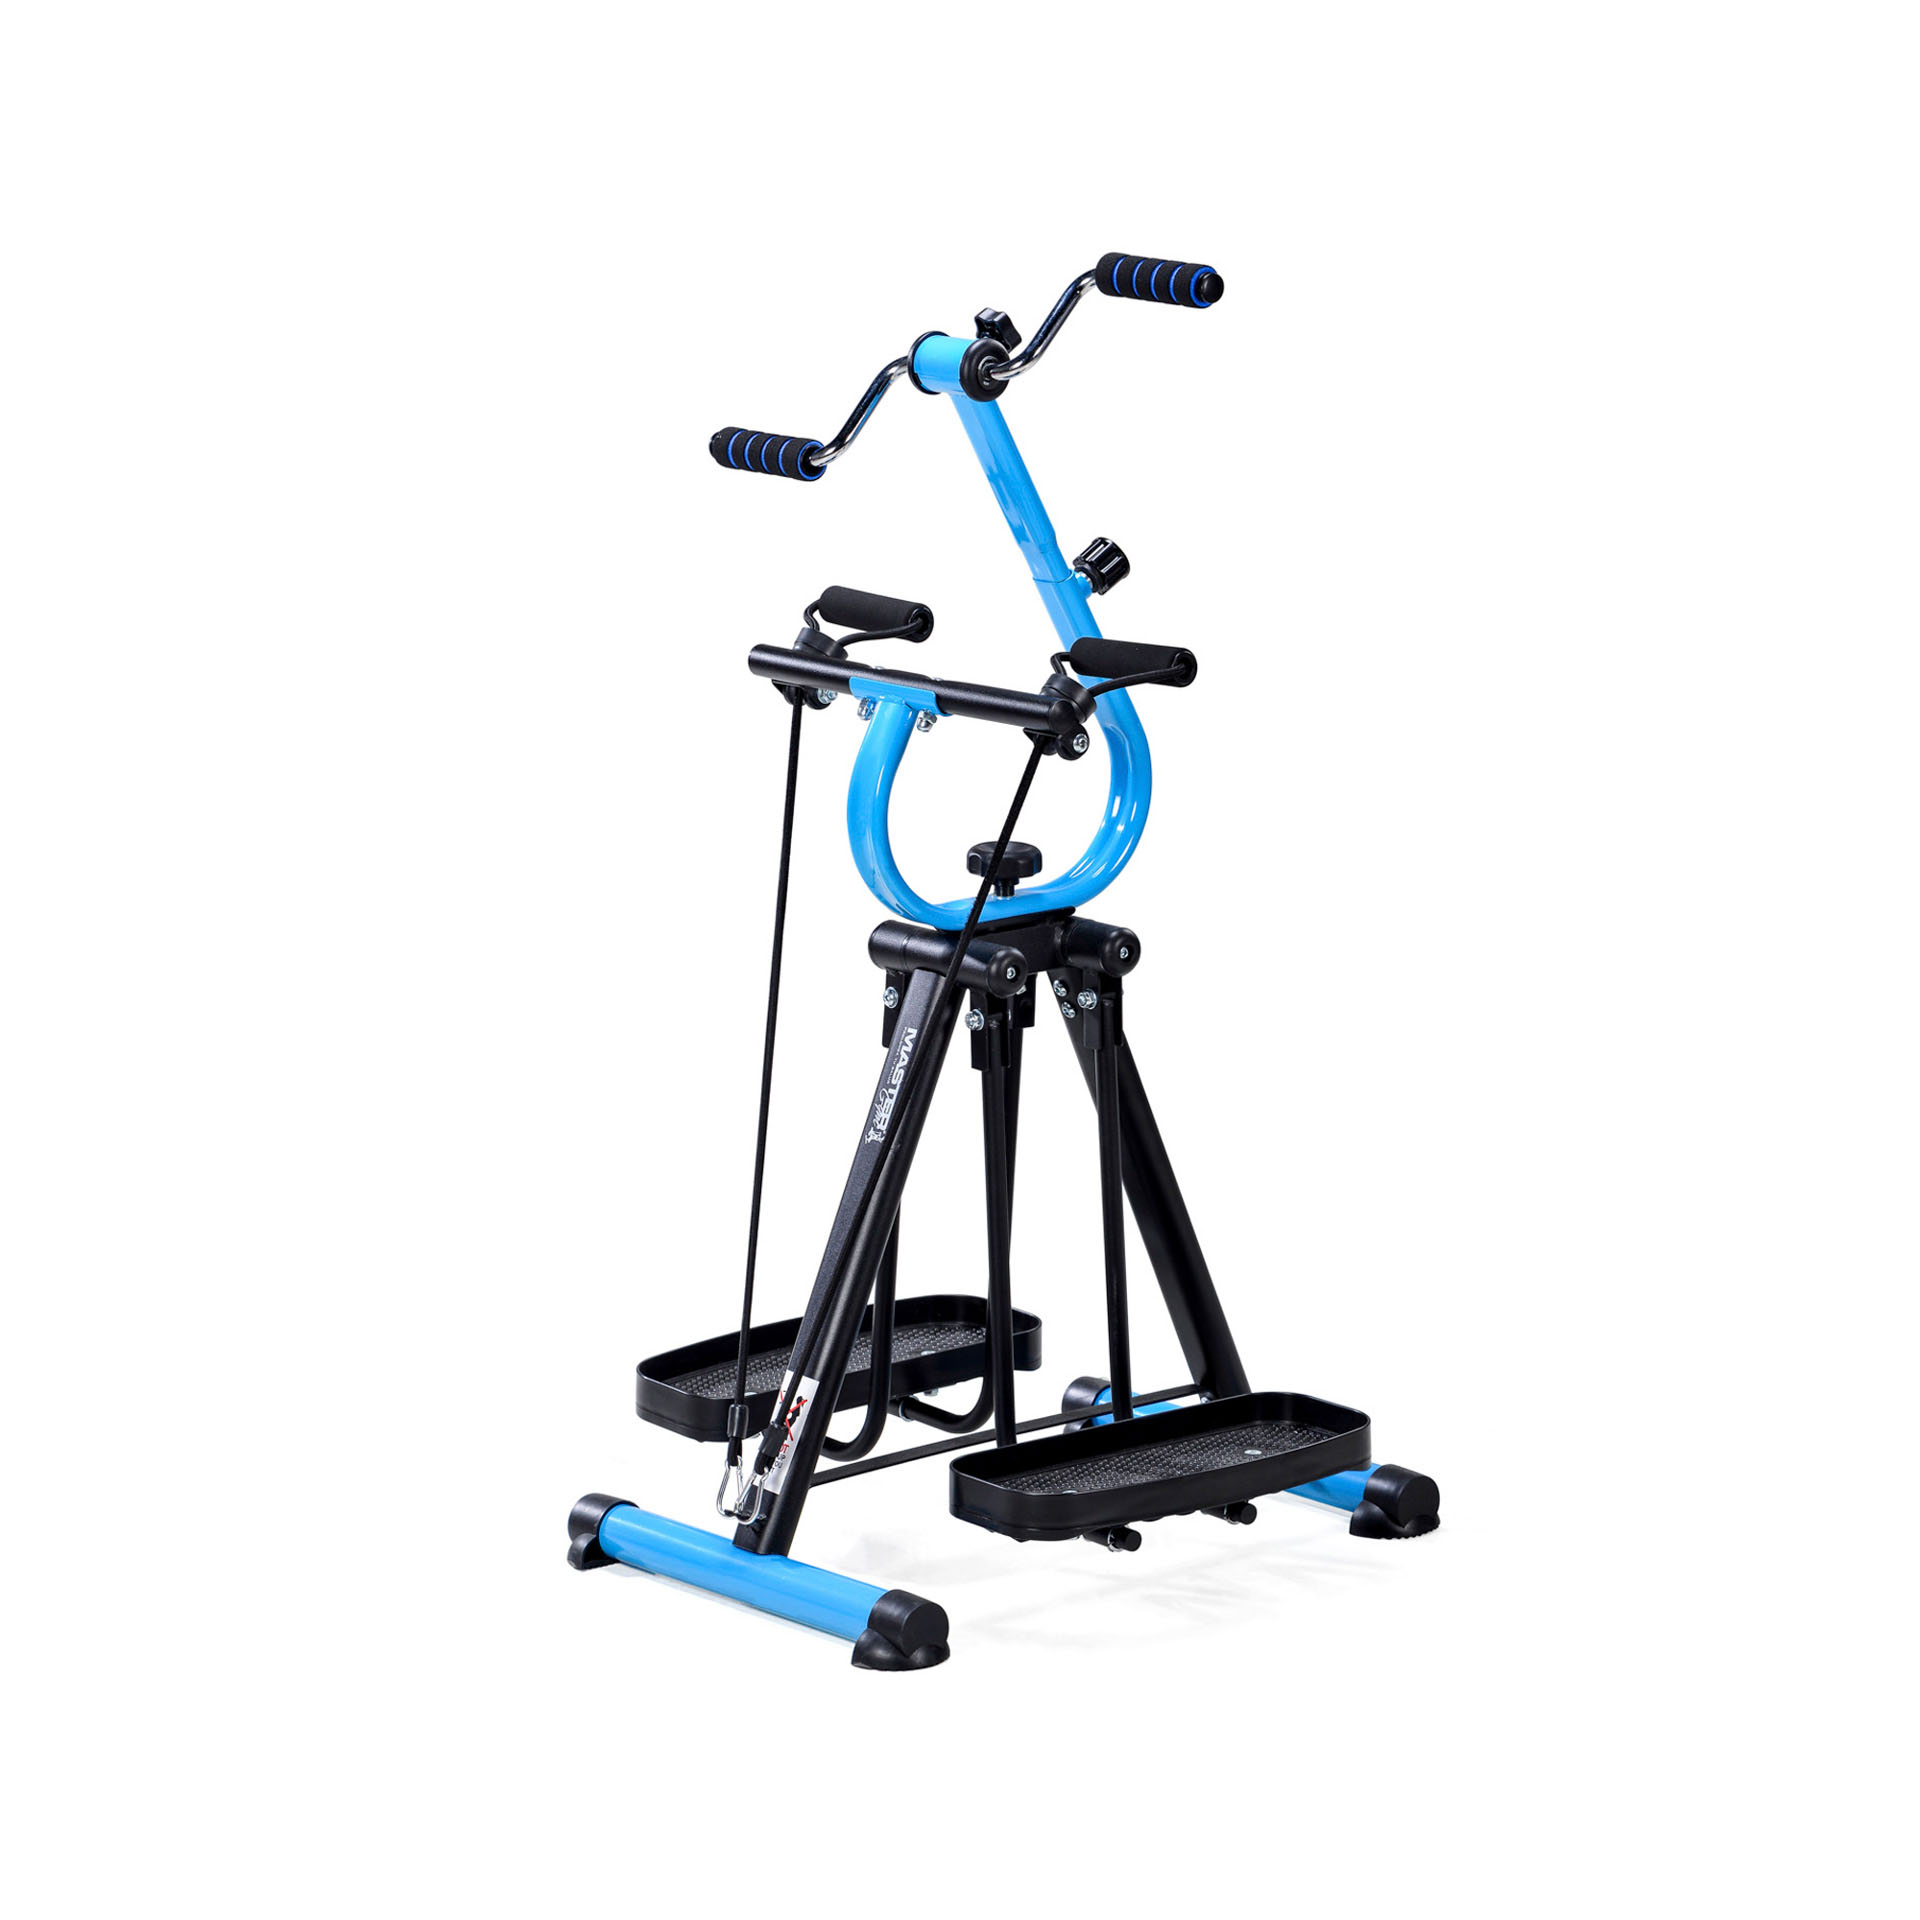 Cyclette multifunzione Master Gym, , large